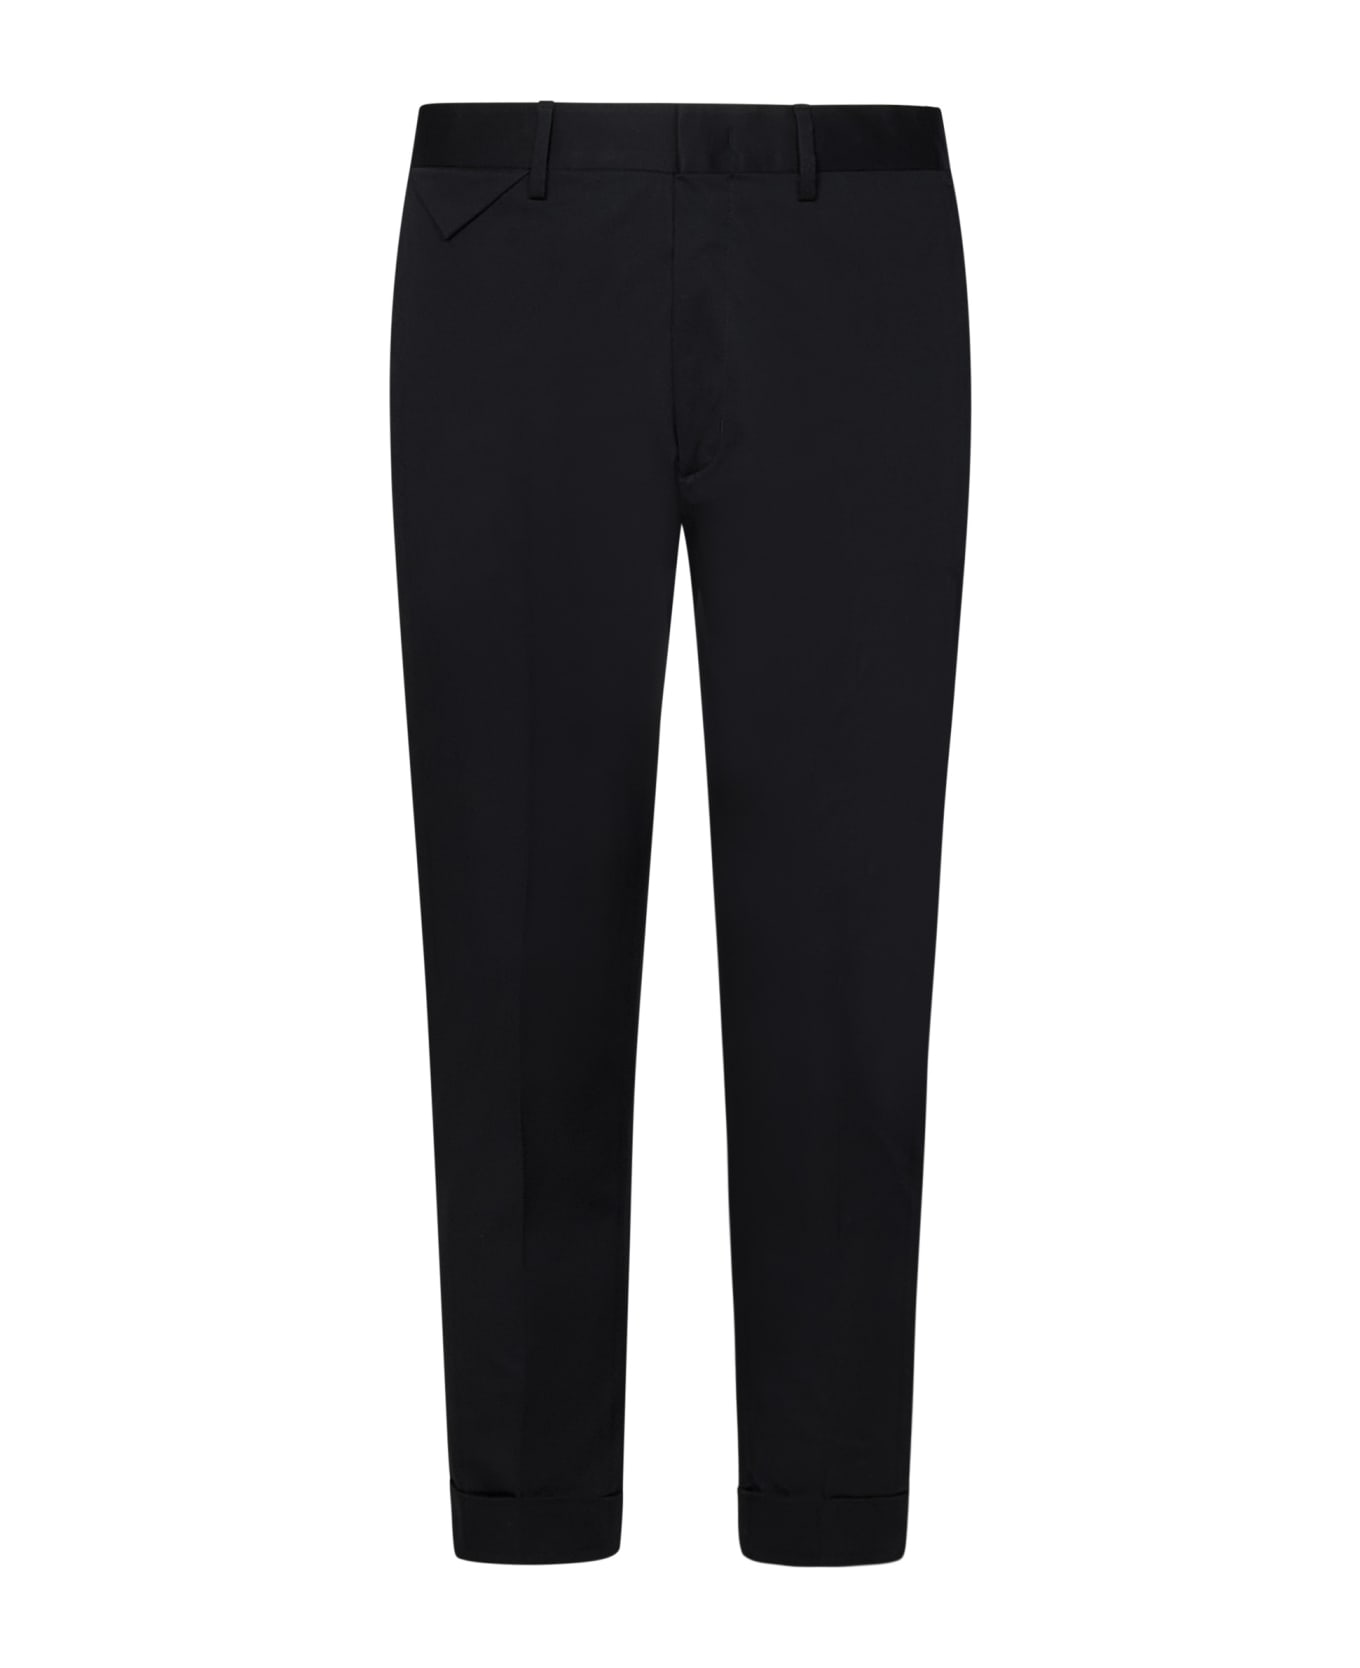 Low Brand Cooper T1.7 Trousers - Black